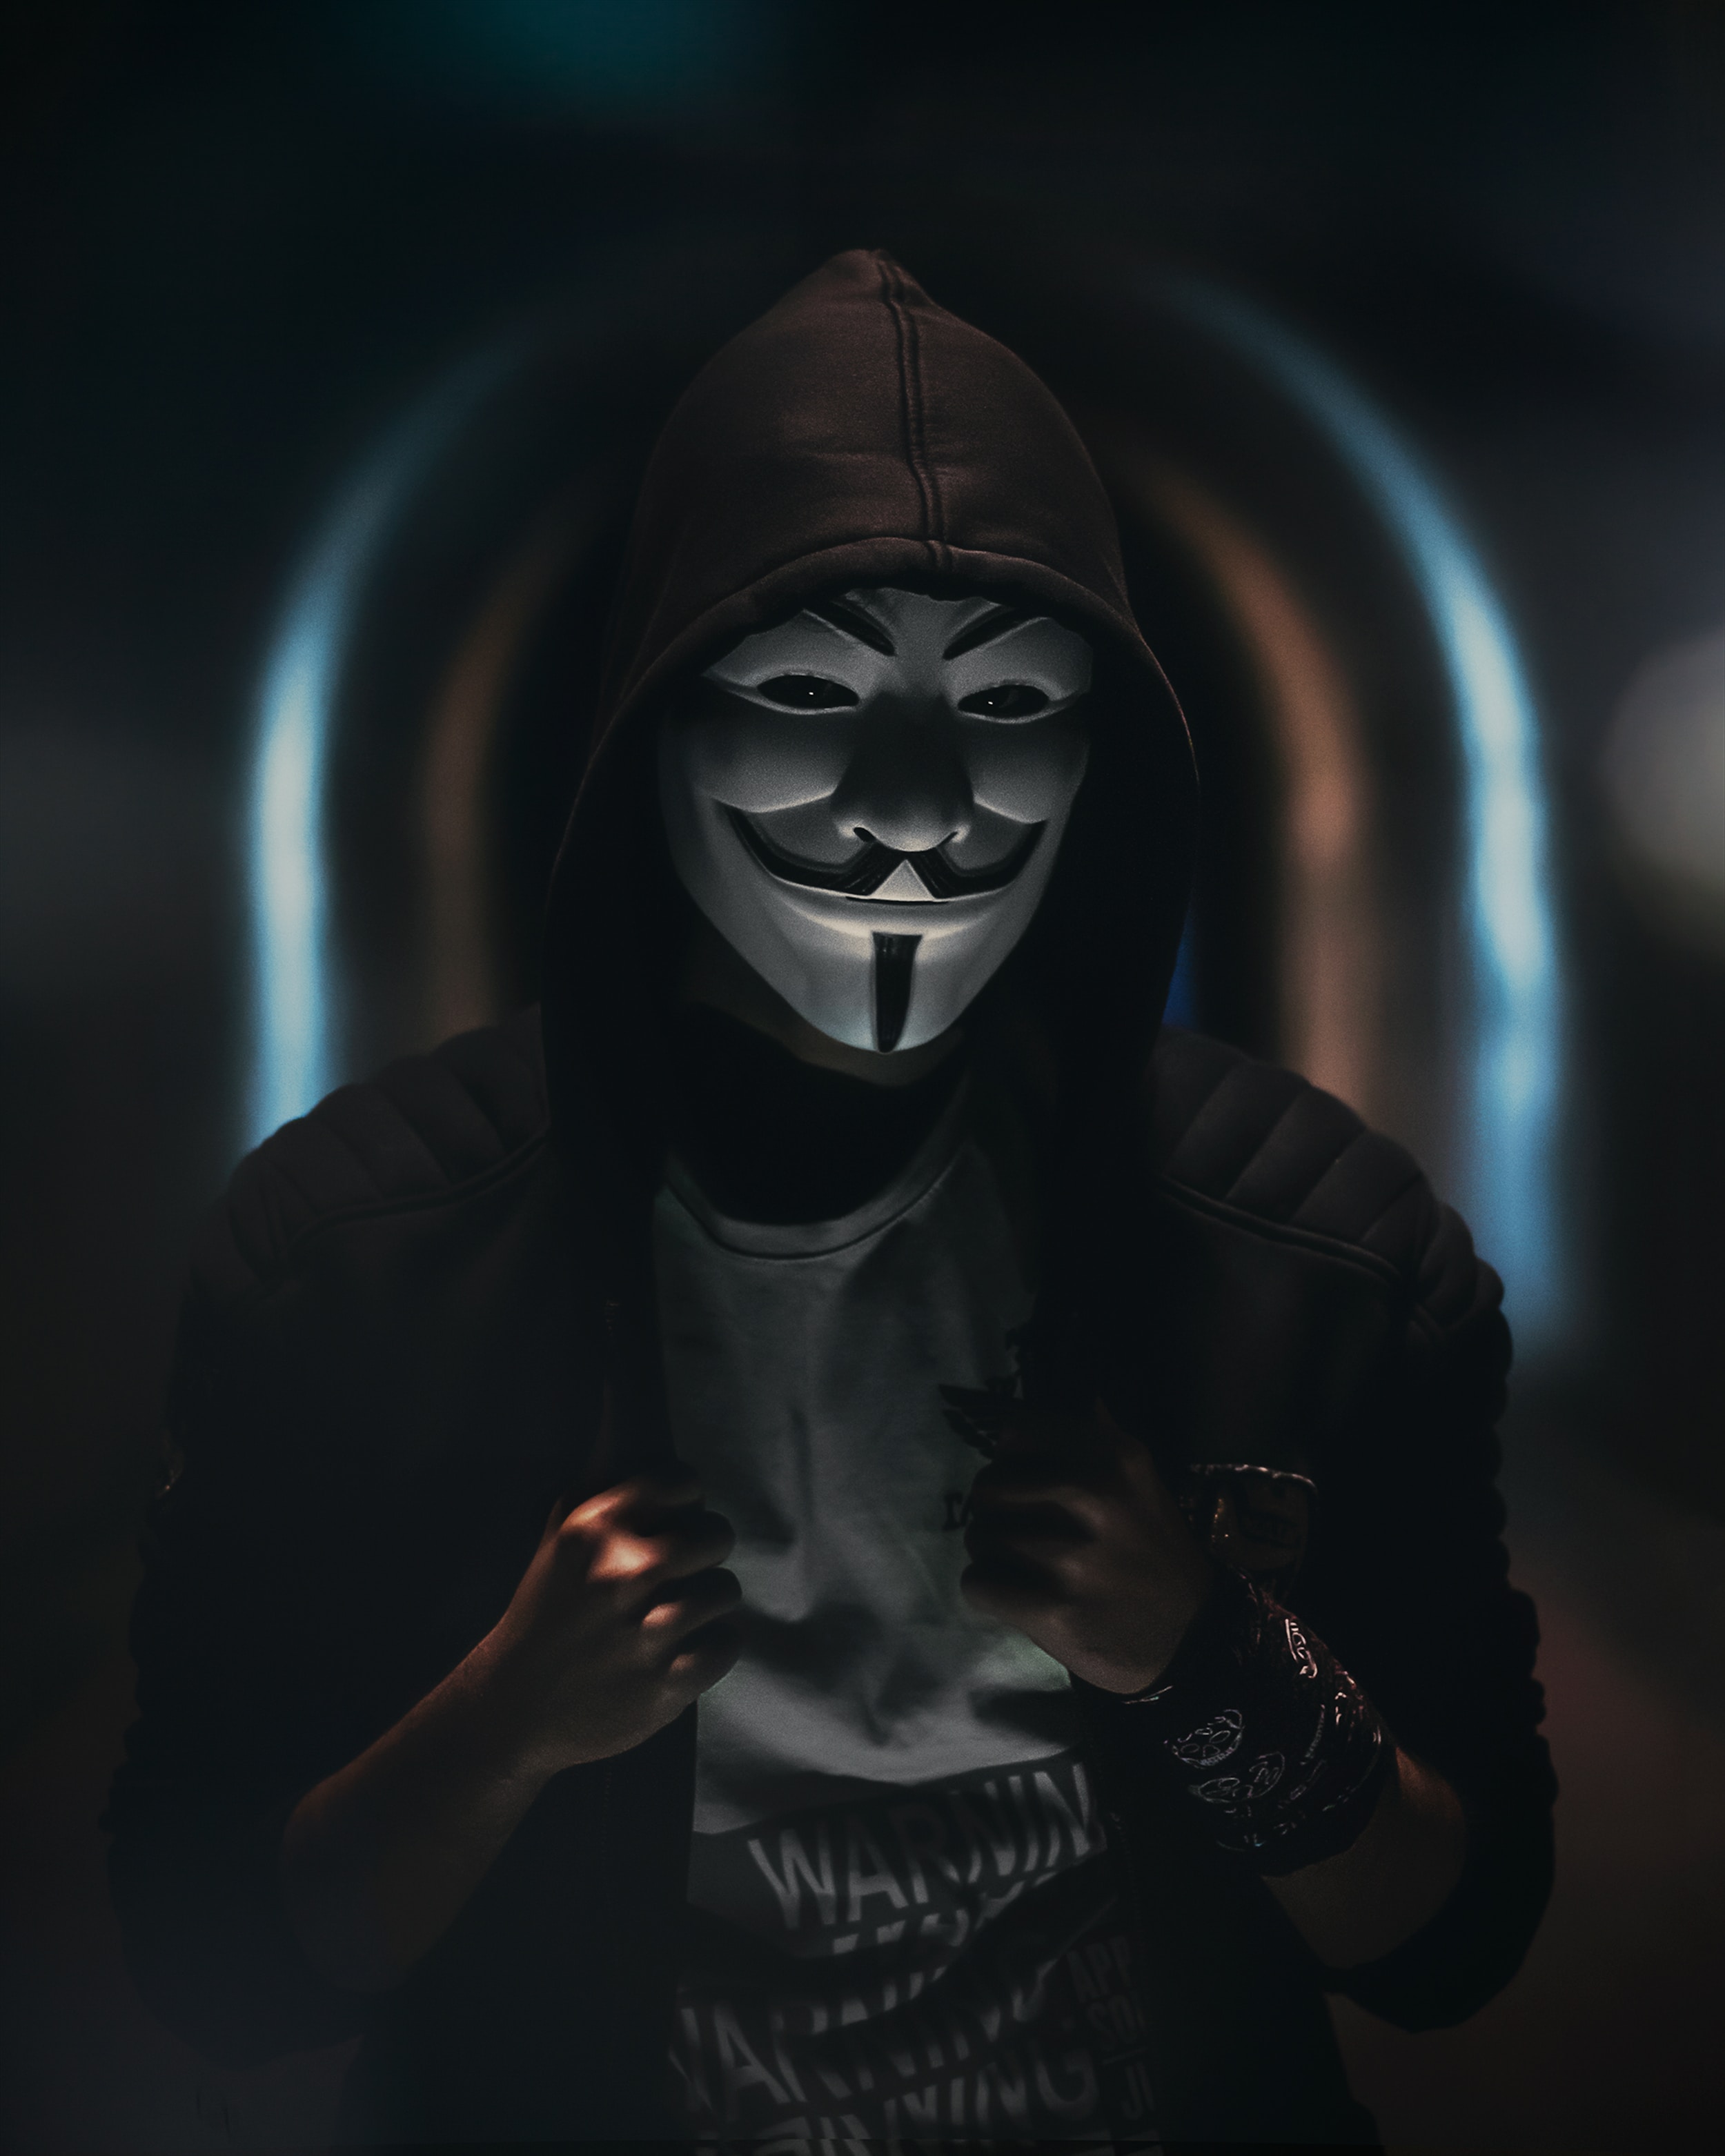 android dark, anonymous, mask, hood, person, human, miscellanea, miscellaneous